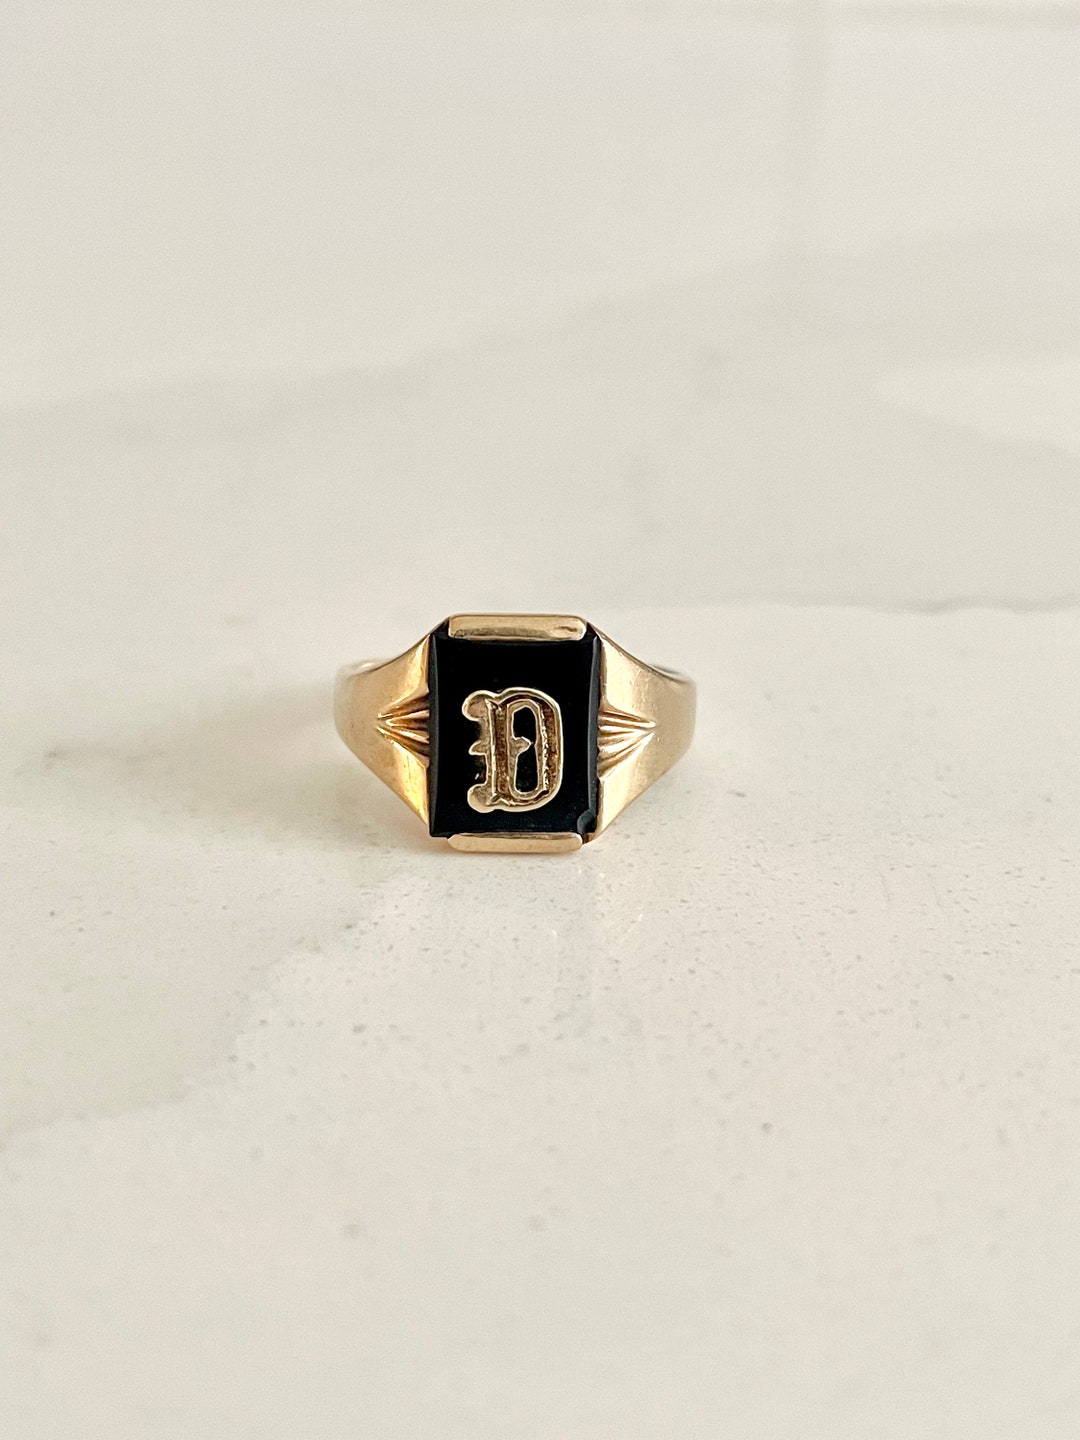 Gold Signet Ring - womens signet ring - custom signet ring - monogram -  initial ring - Customize Ring - Bridesmaids Ring -Personalized Ring